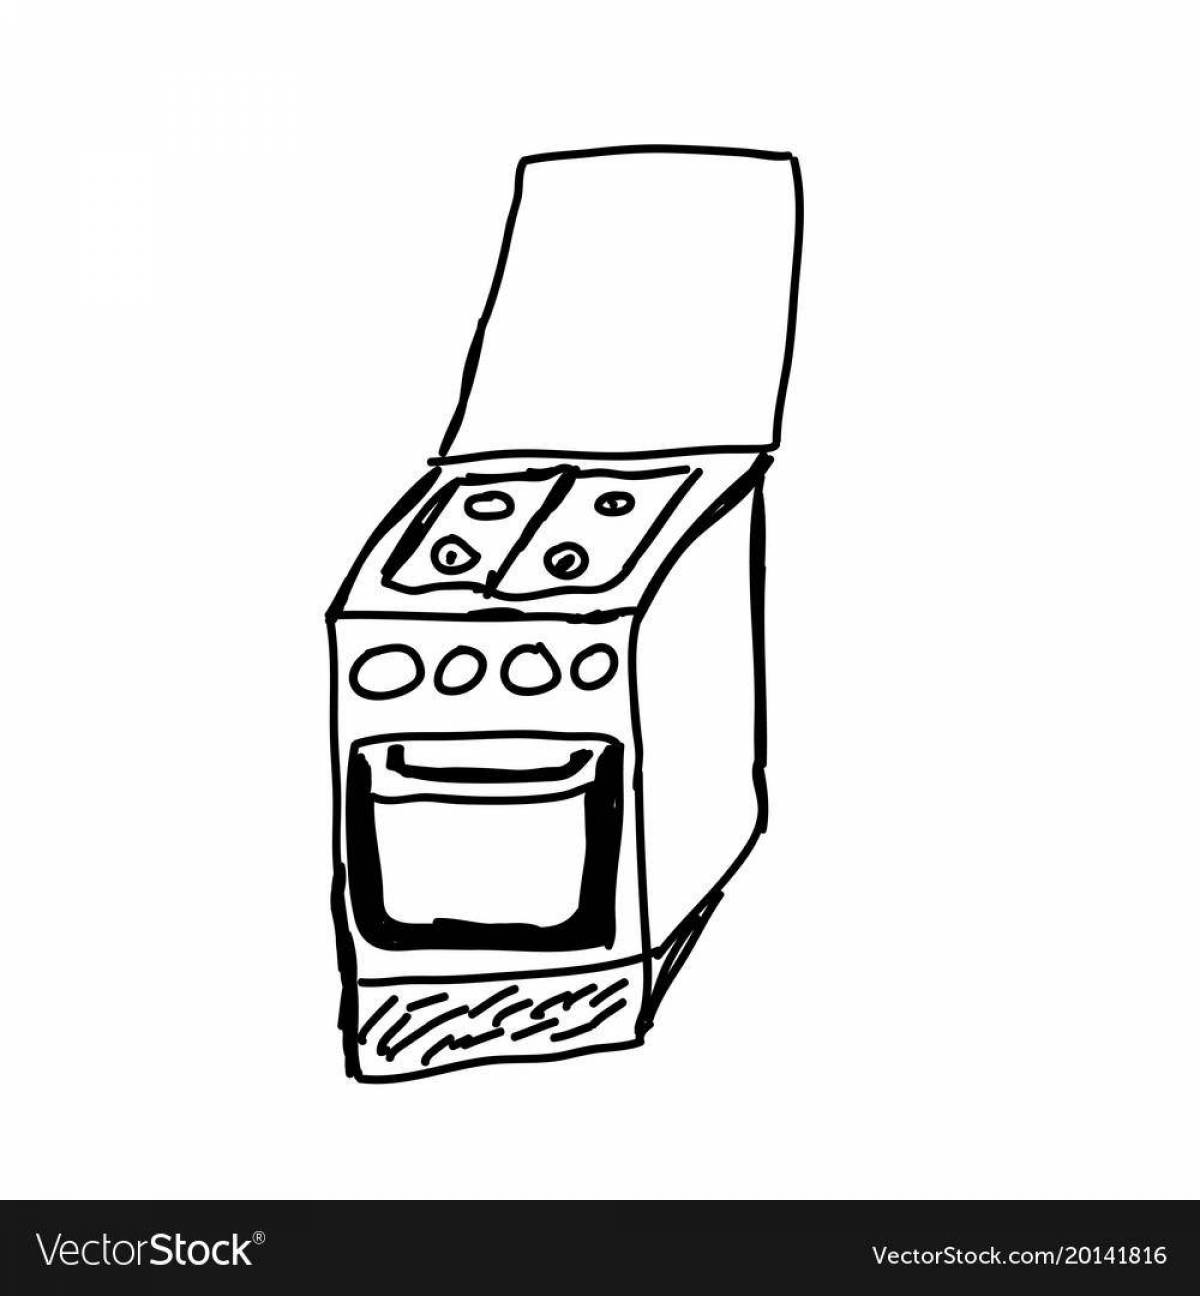 Playful kitchen stove coloring page